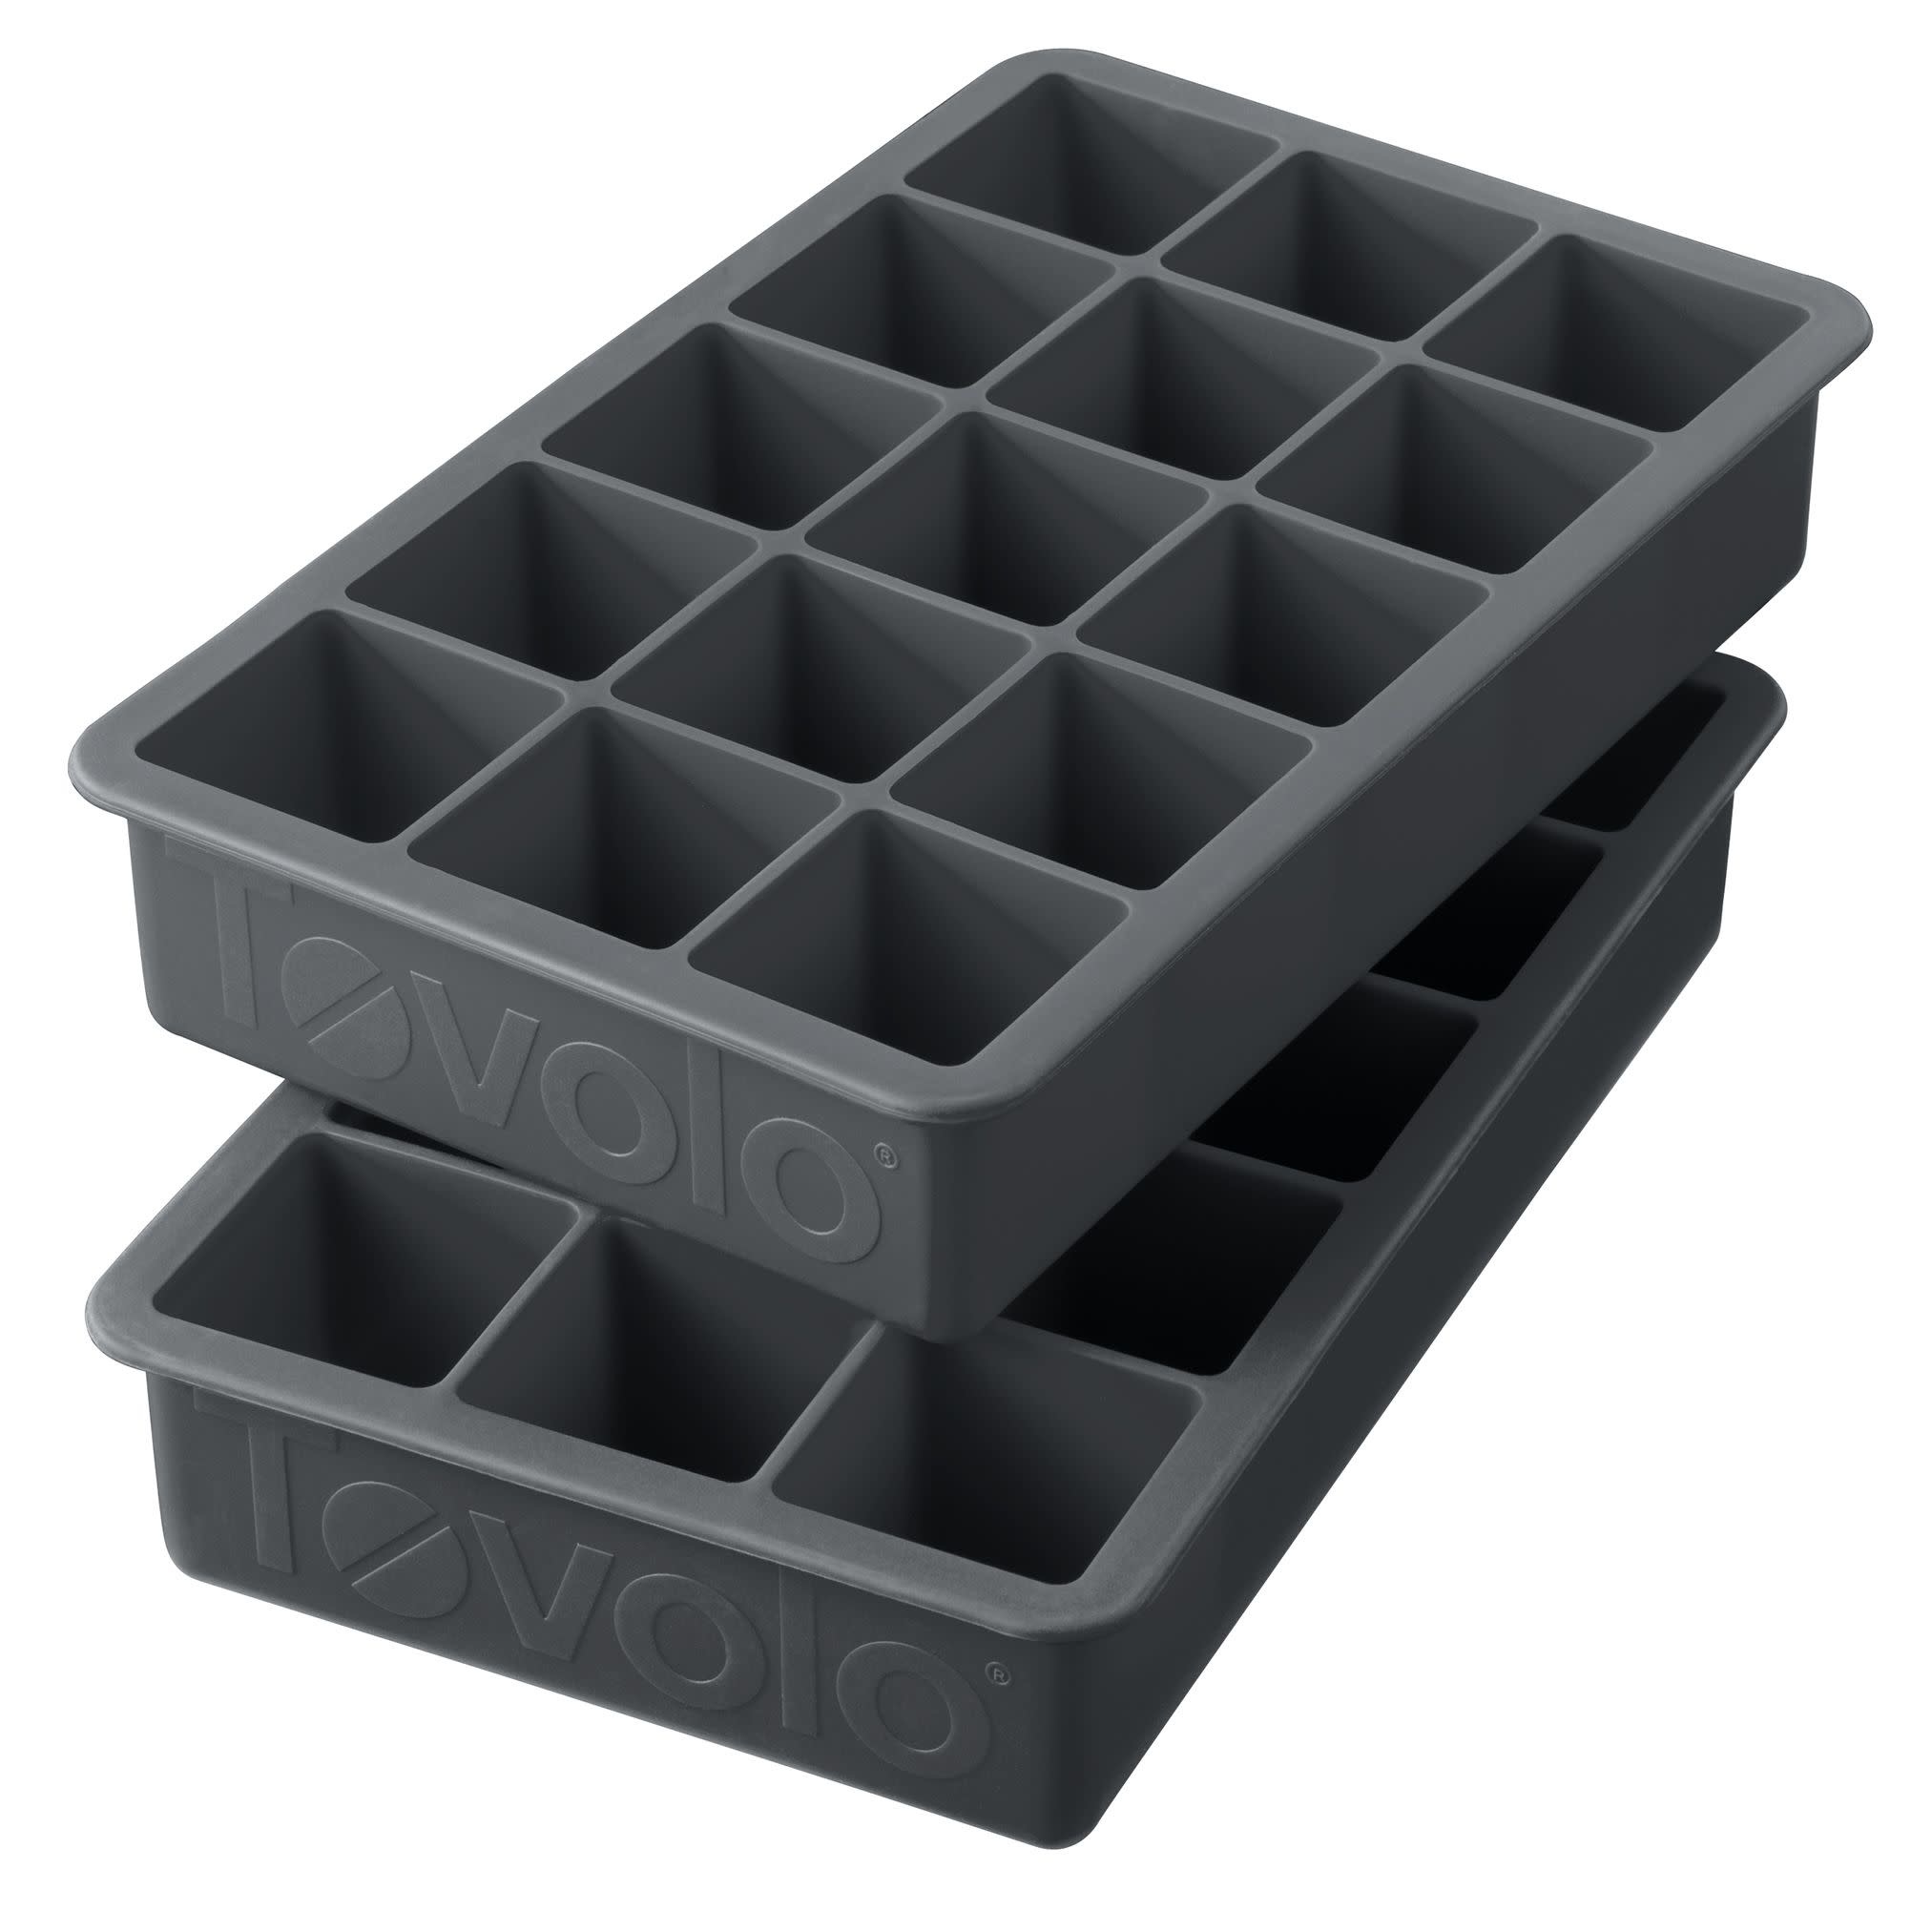 Charcoal Grey Tovolo Perfect Ice Cube Trays - Whisk